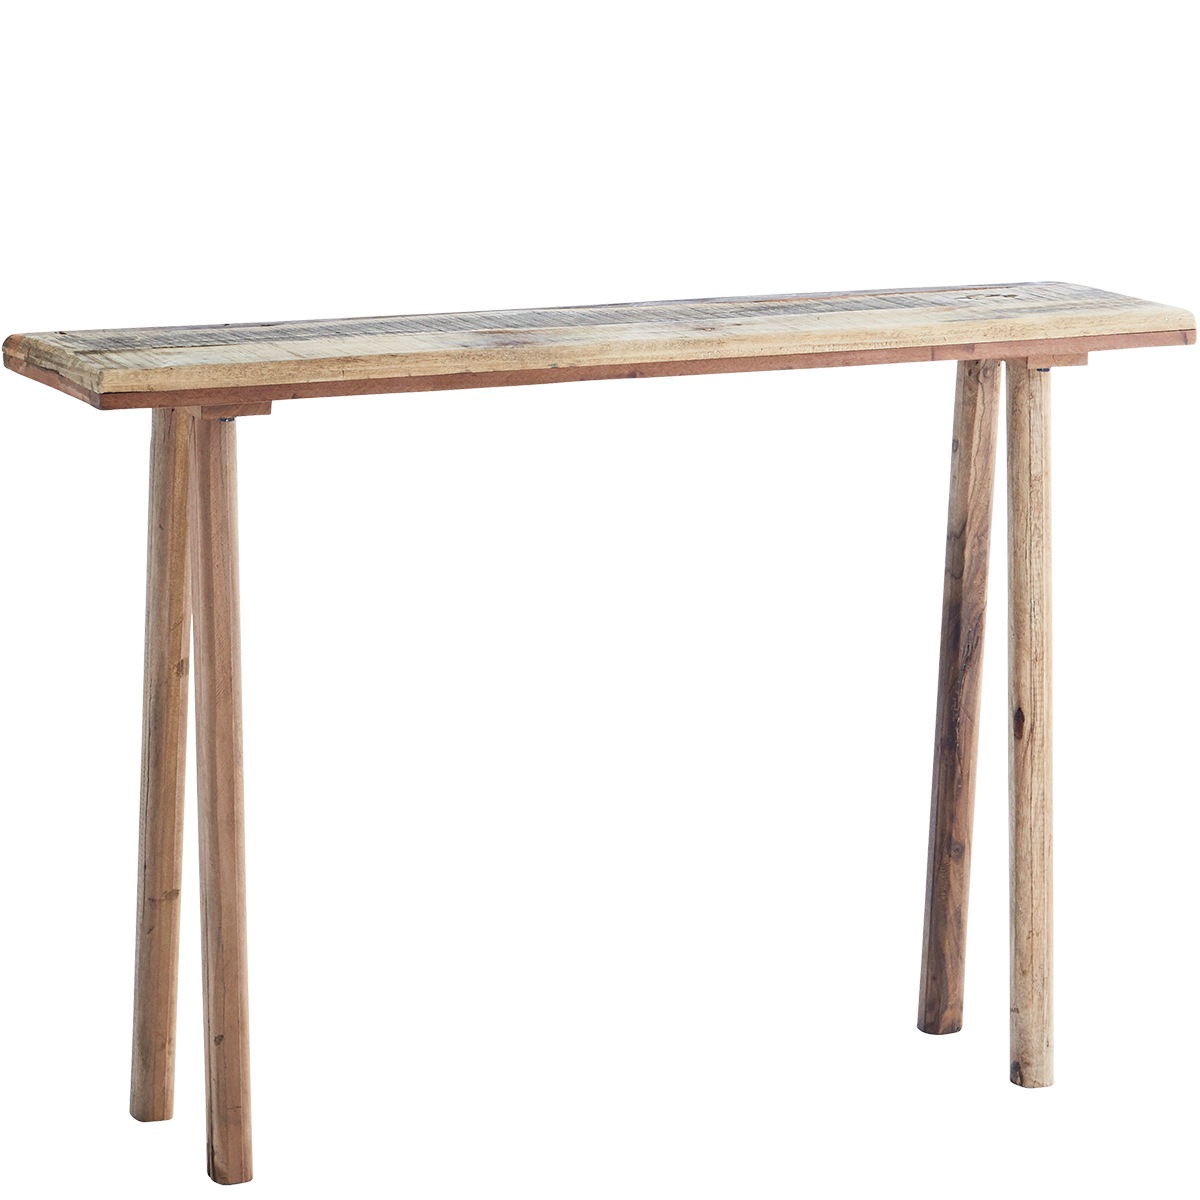 Wooden console table, 105x25x70 cm